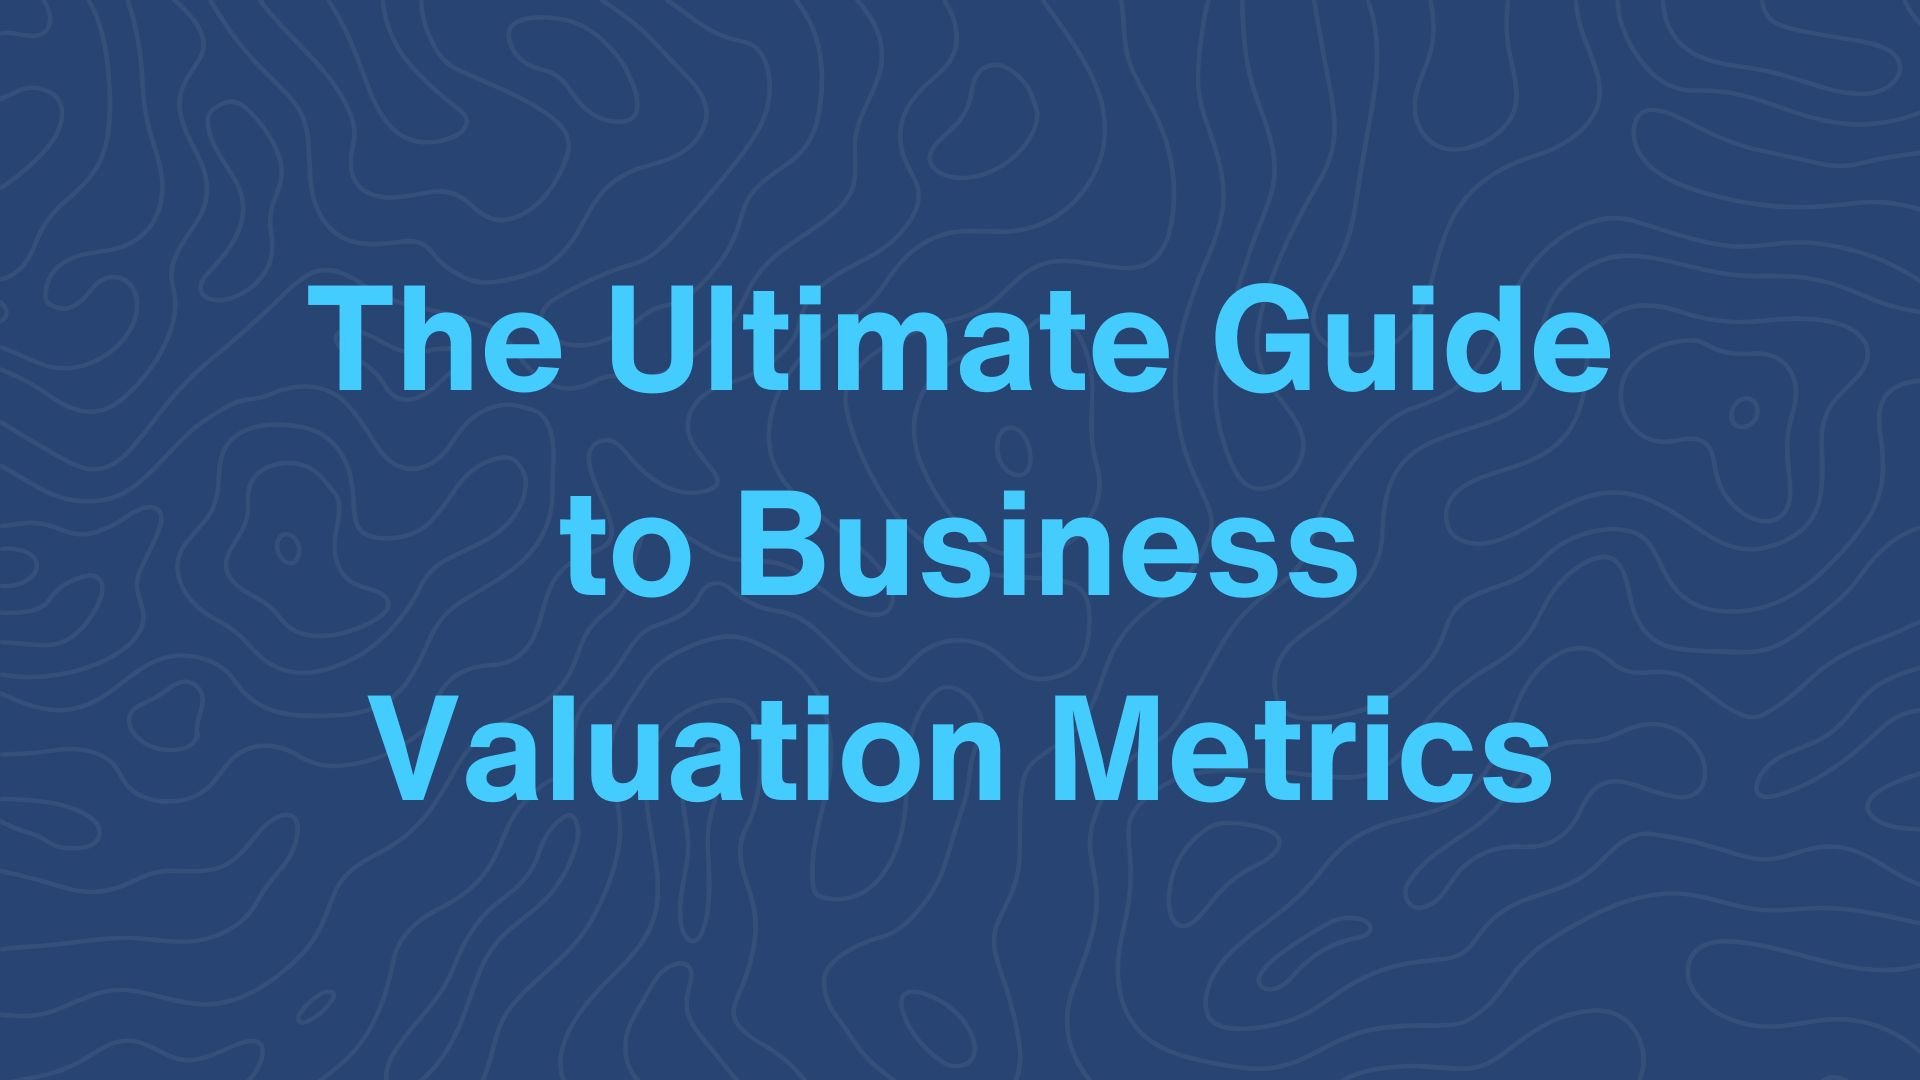 The Ultimate Guide to Business Valuation Metrics